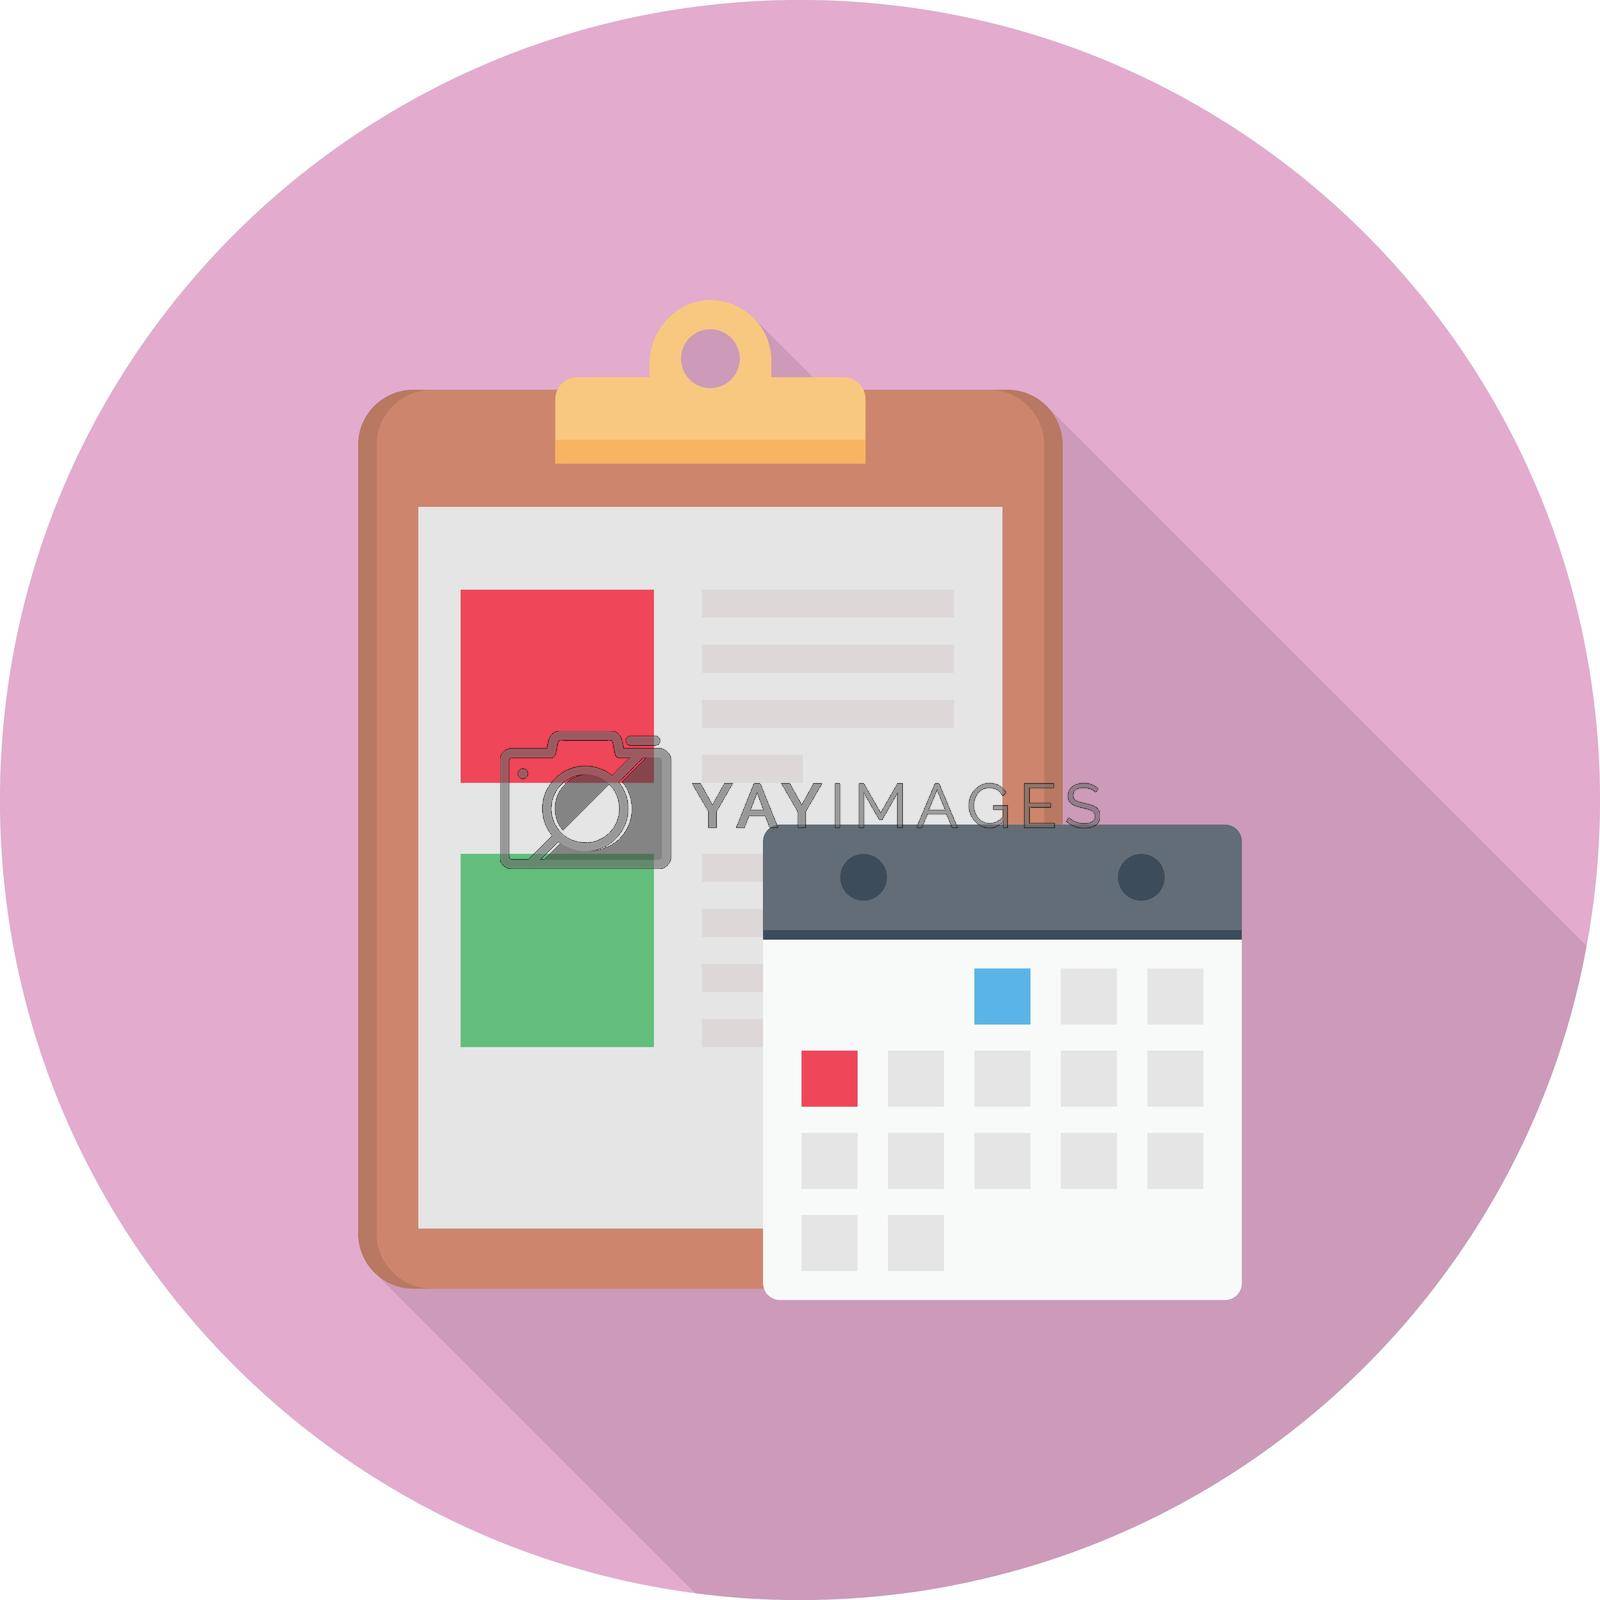 Royalty free image of calendar by vectorstall